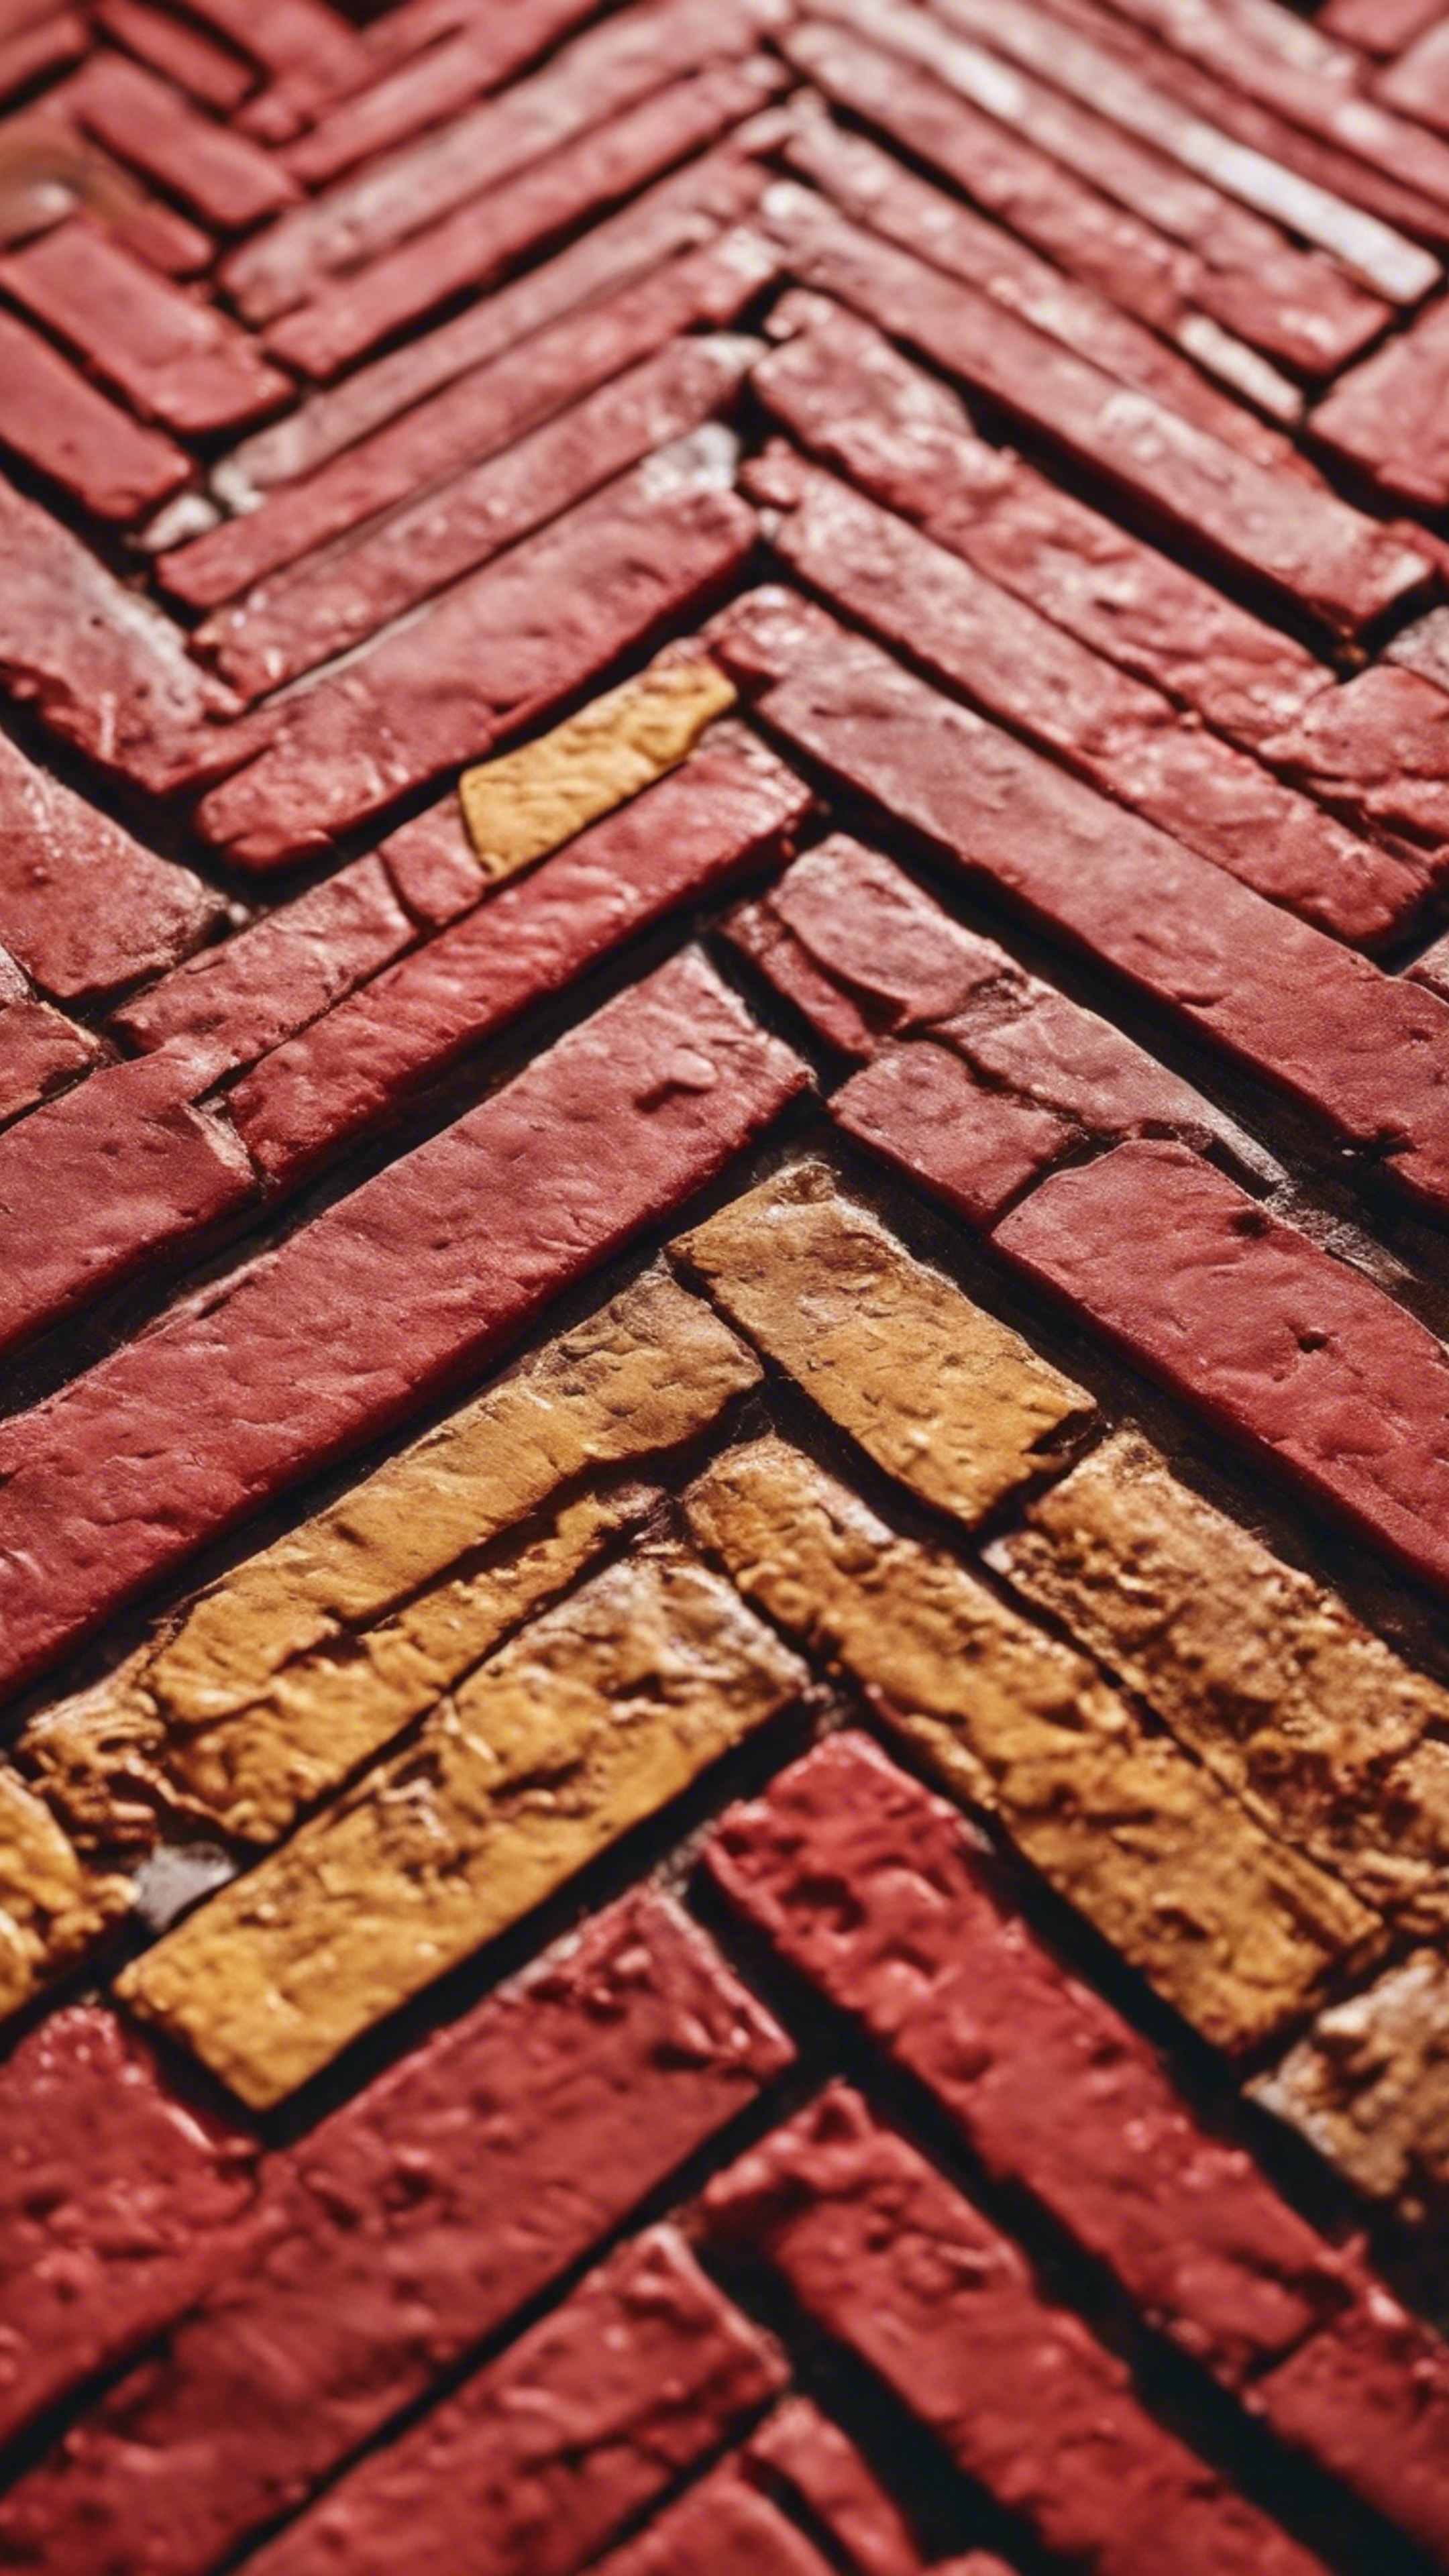 A pathway comprising a herringbone pattern using bricks in shades of red and yellow. ورق الجدران[fb3238611eed4691b5b0]